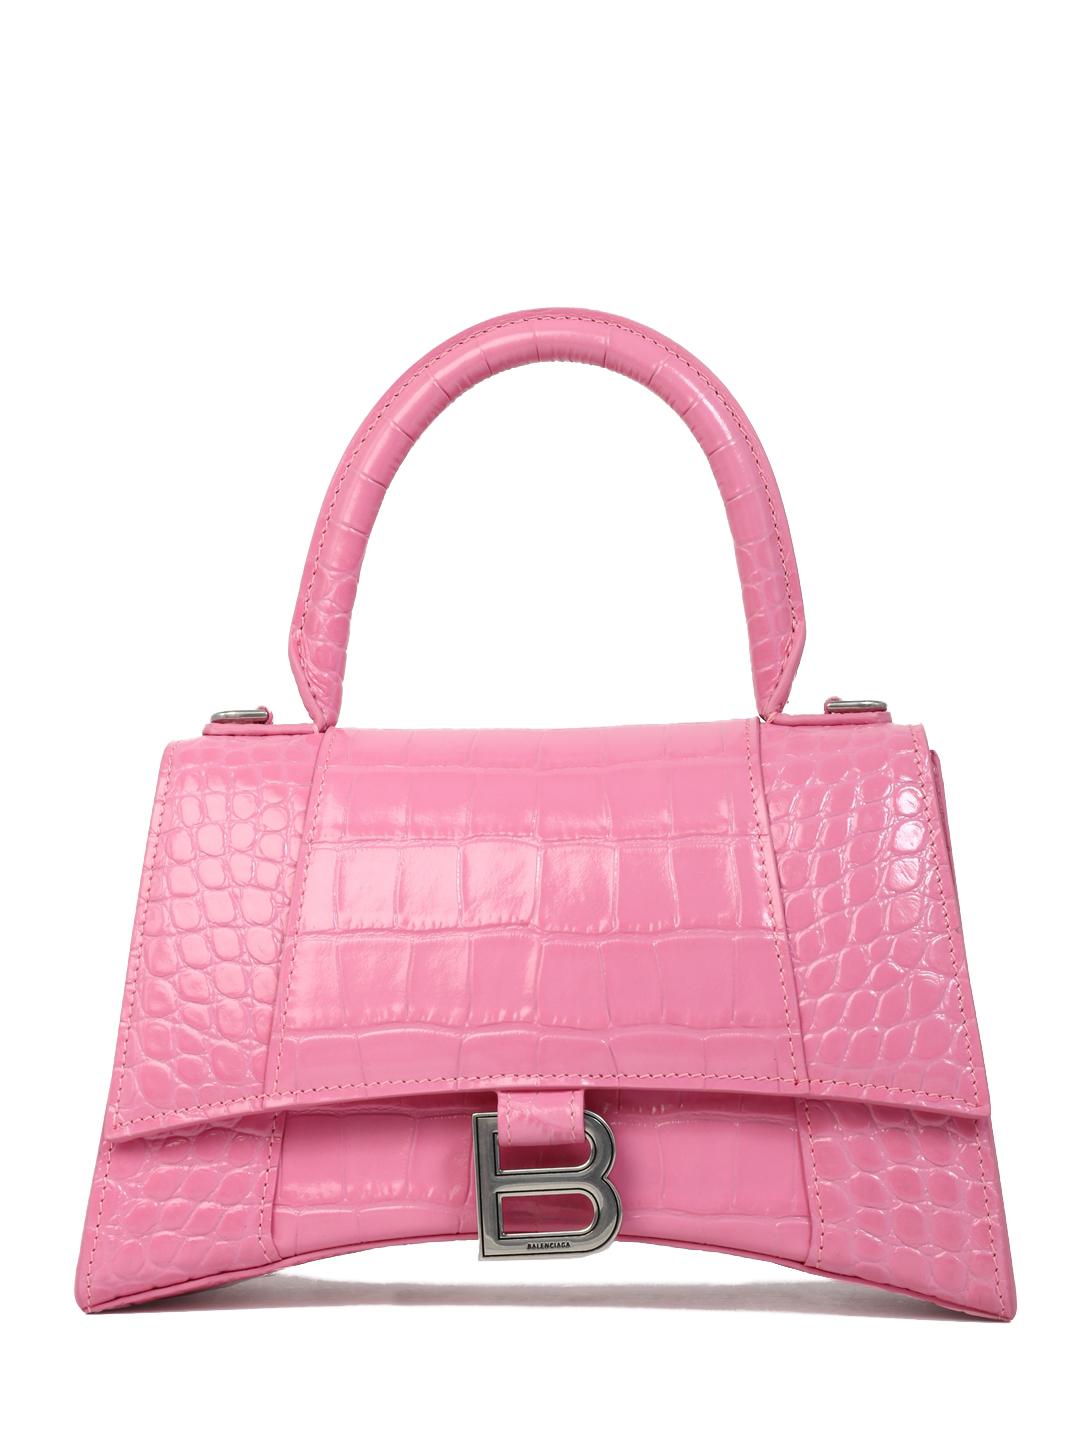 Balenciaga Suede Hourglass Small Bag in Pink | Lyst